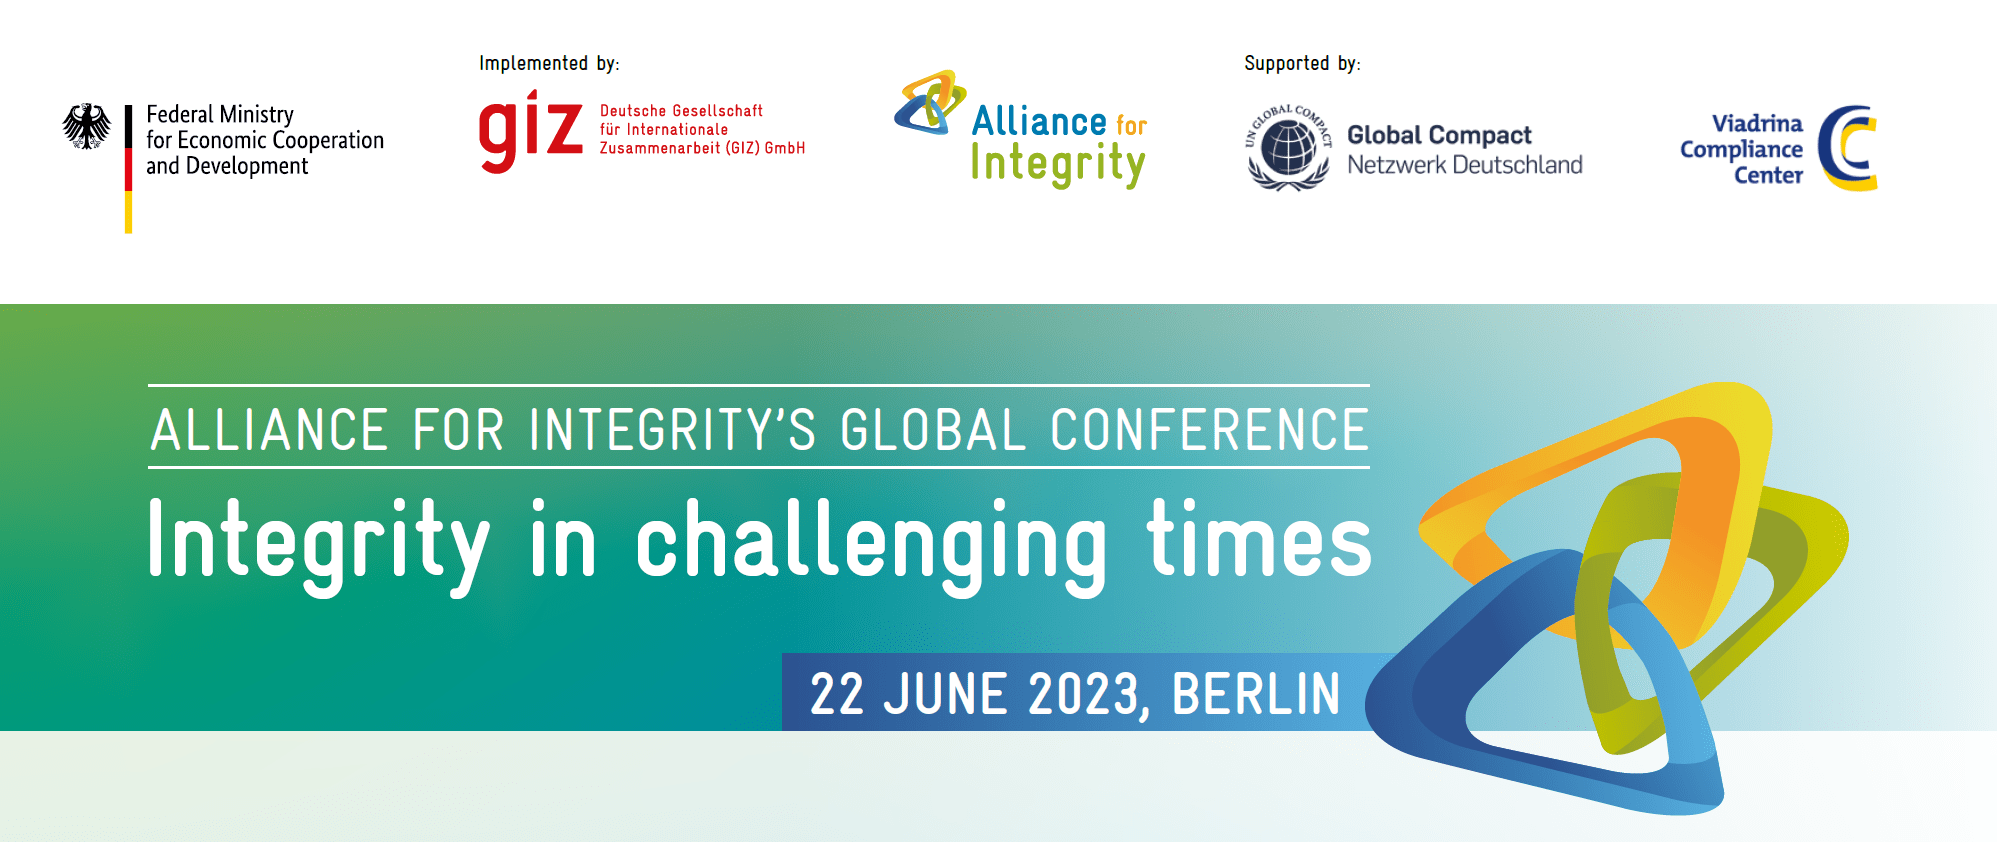 Alliance for Integrity’s Global Conference 2023 Alliance for Integrity